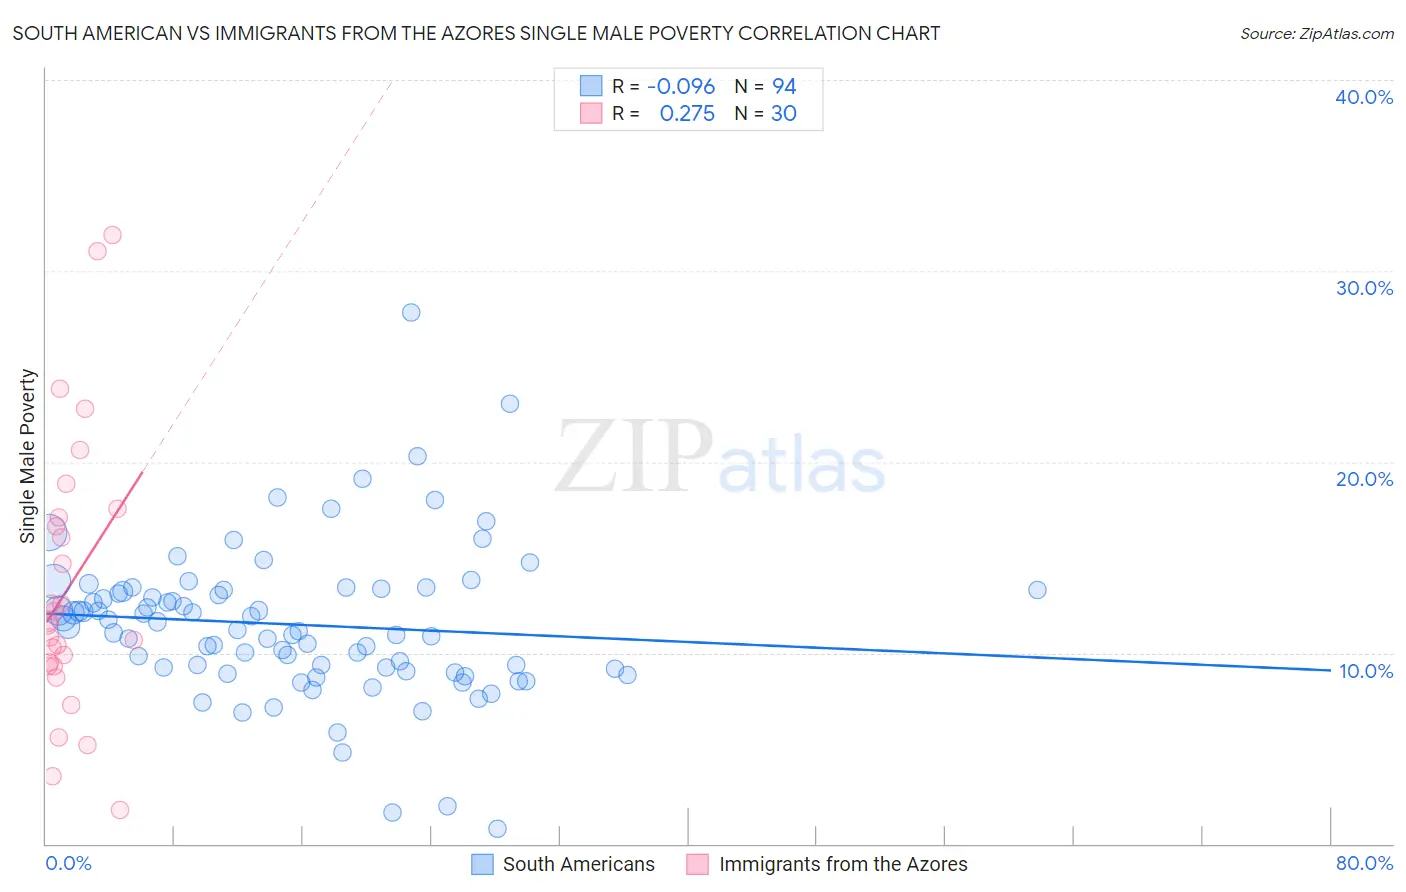 South American vs Immigrants from the Azores Single Male Poverty